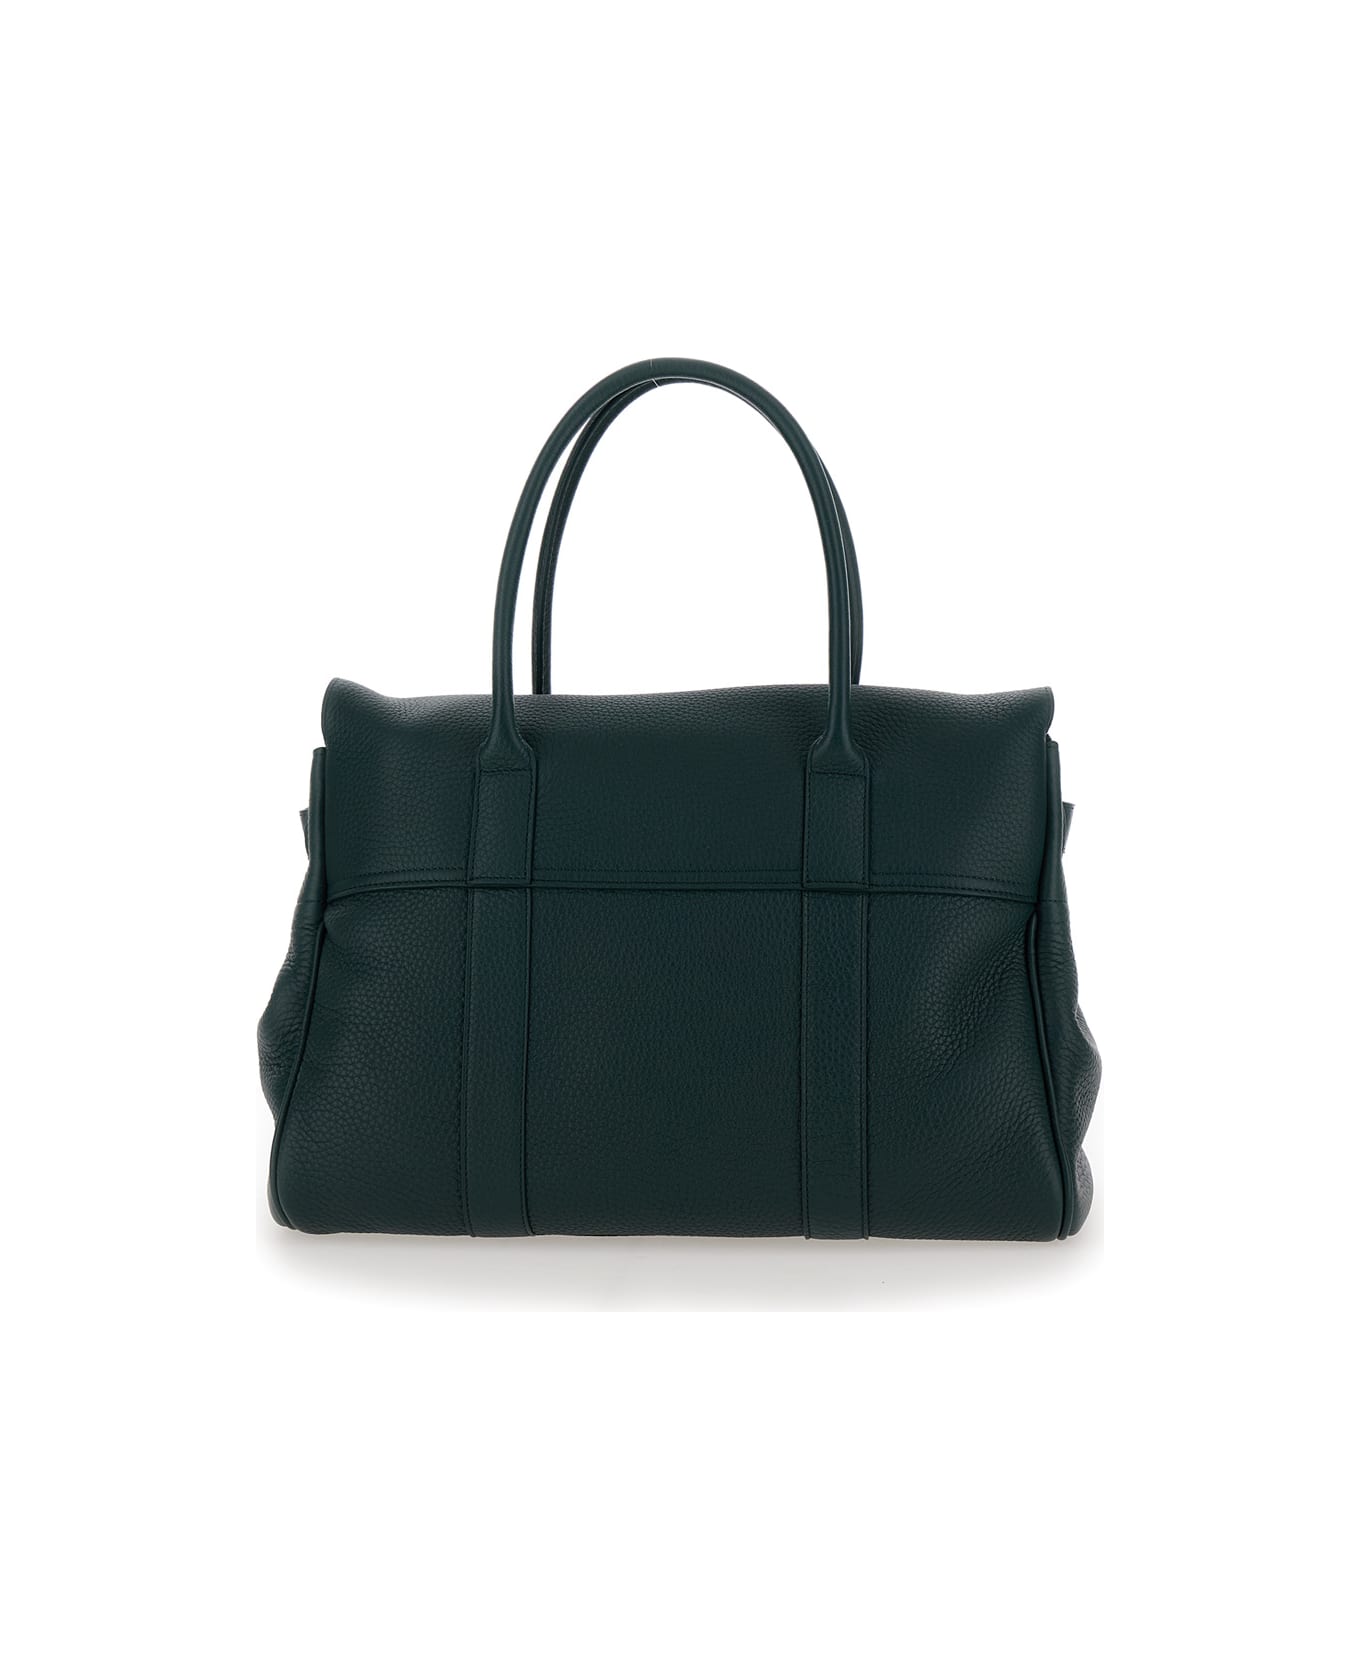 Mulberry 'bayswater' Green Handbag With Postman's Lock In Hammered Leather Woman - Green